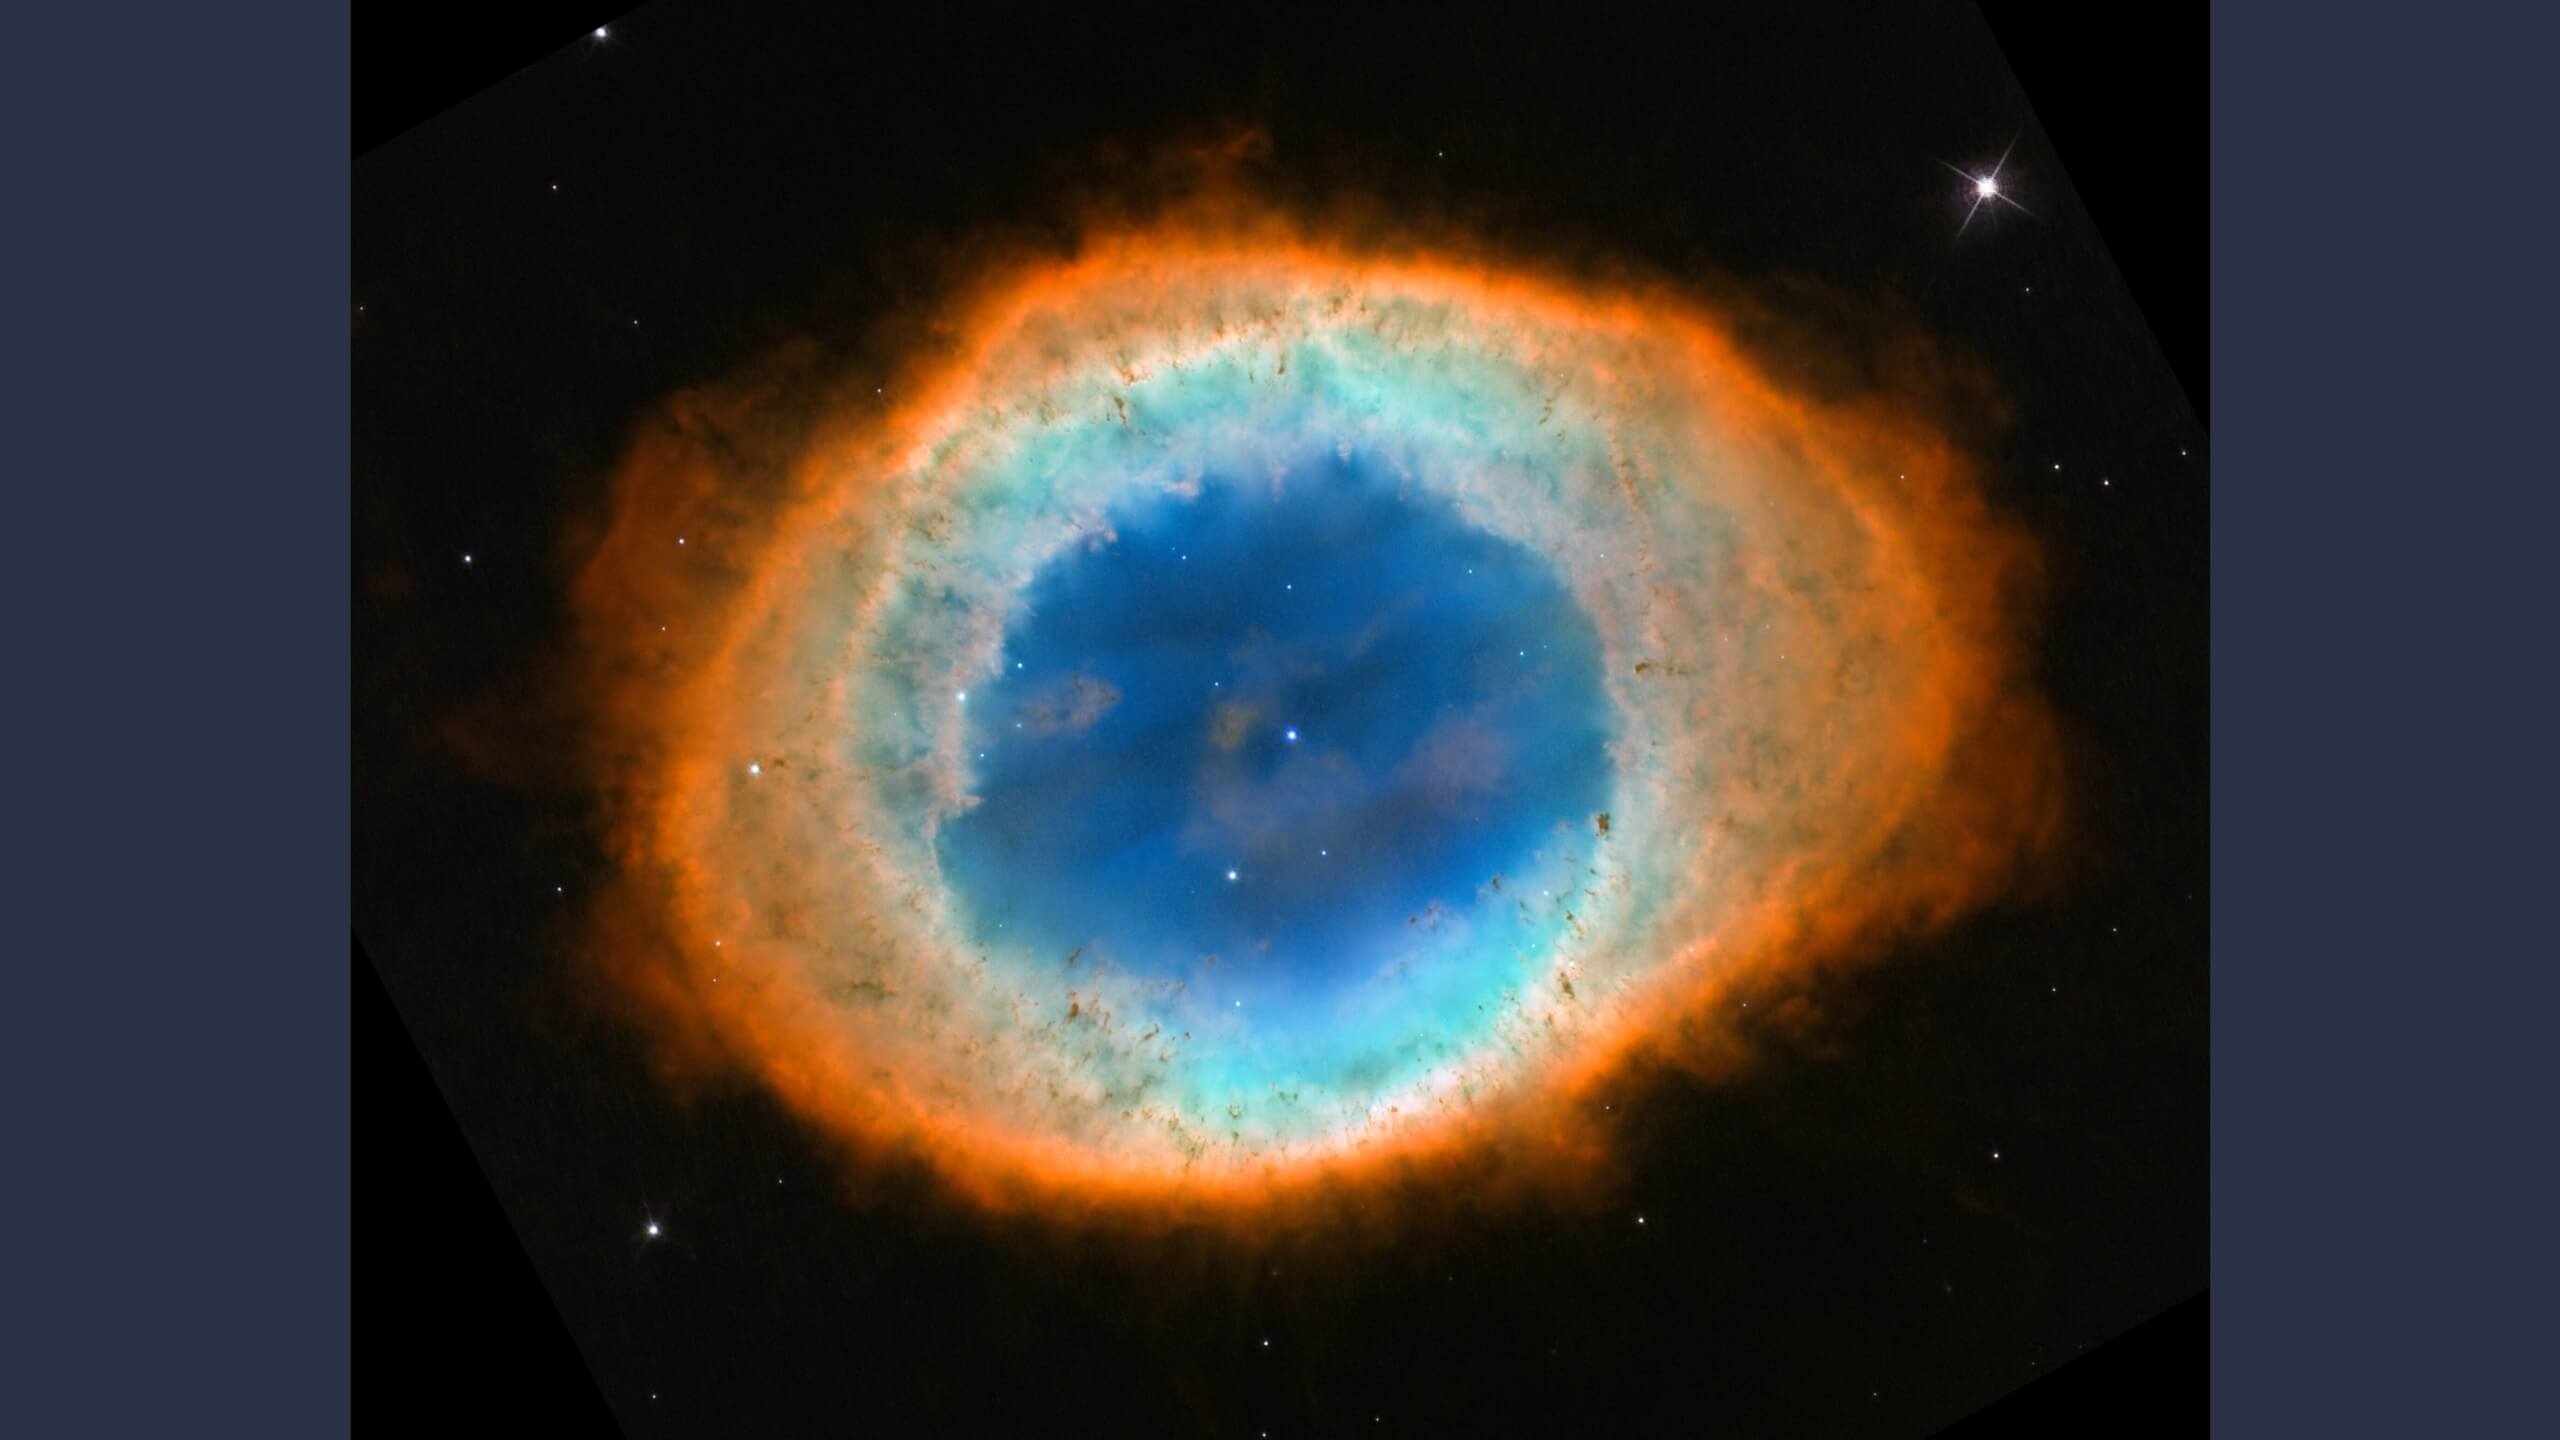 Ring Nebula previously captured by Hubble